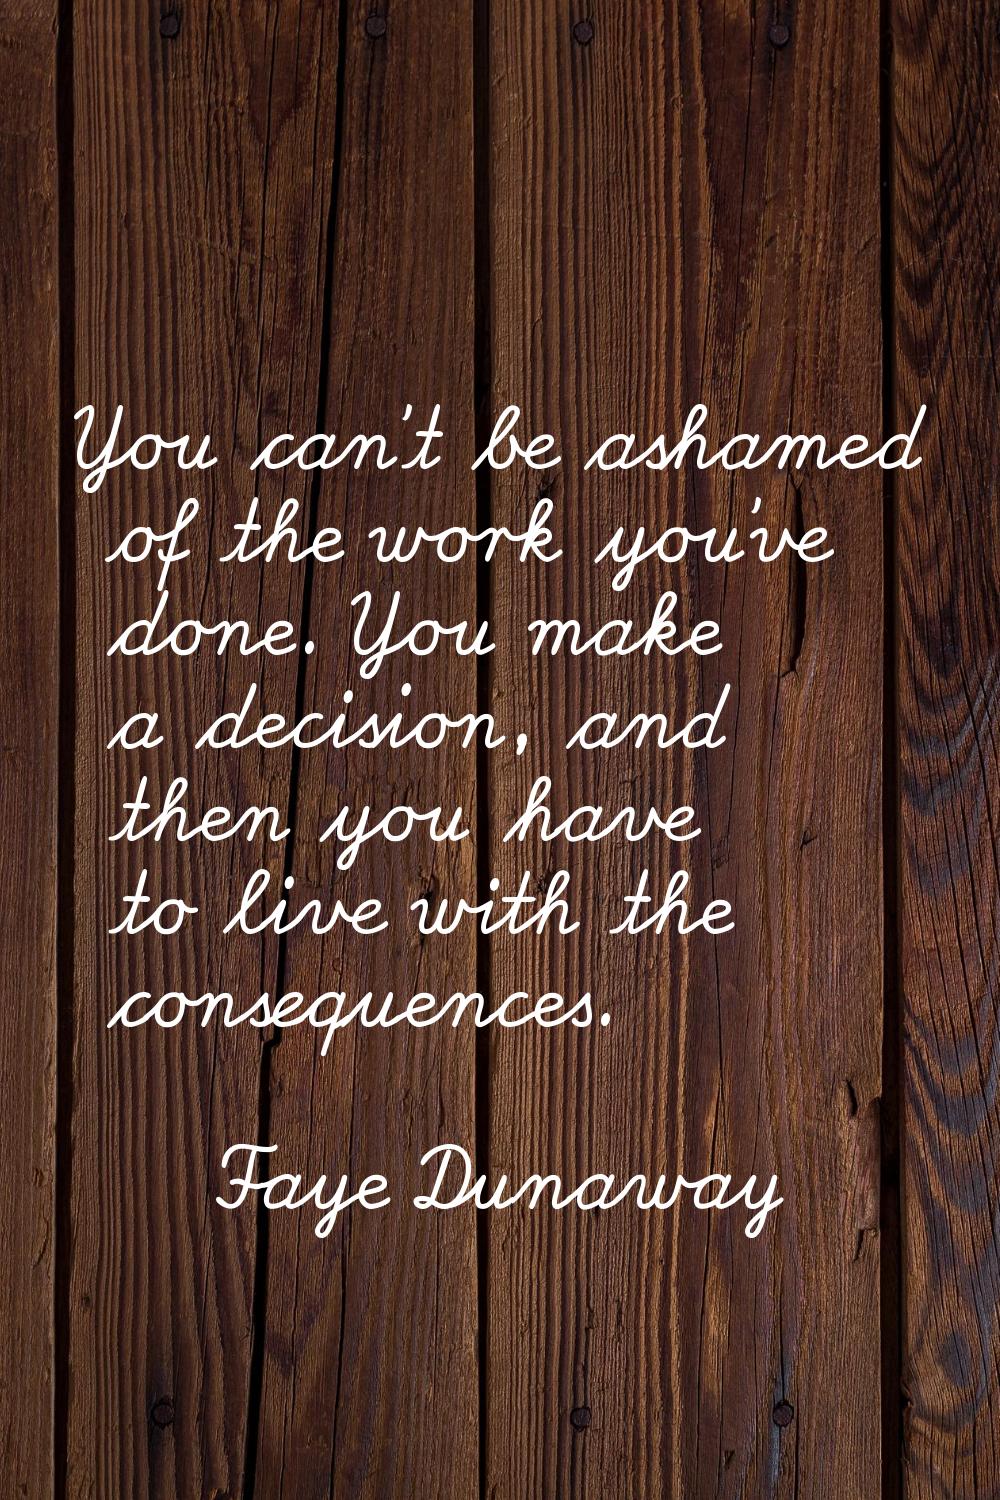 You can't be ashamed of the work you've done. You make a decision, and then you have to live with t